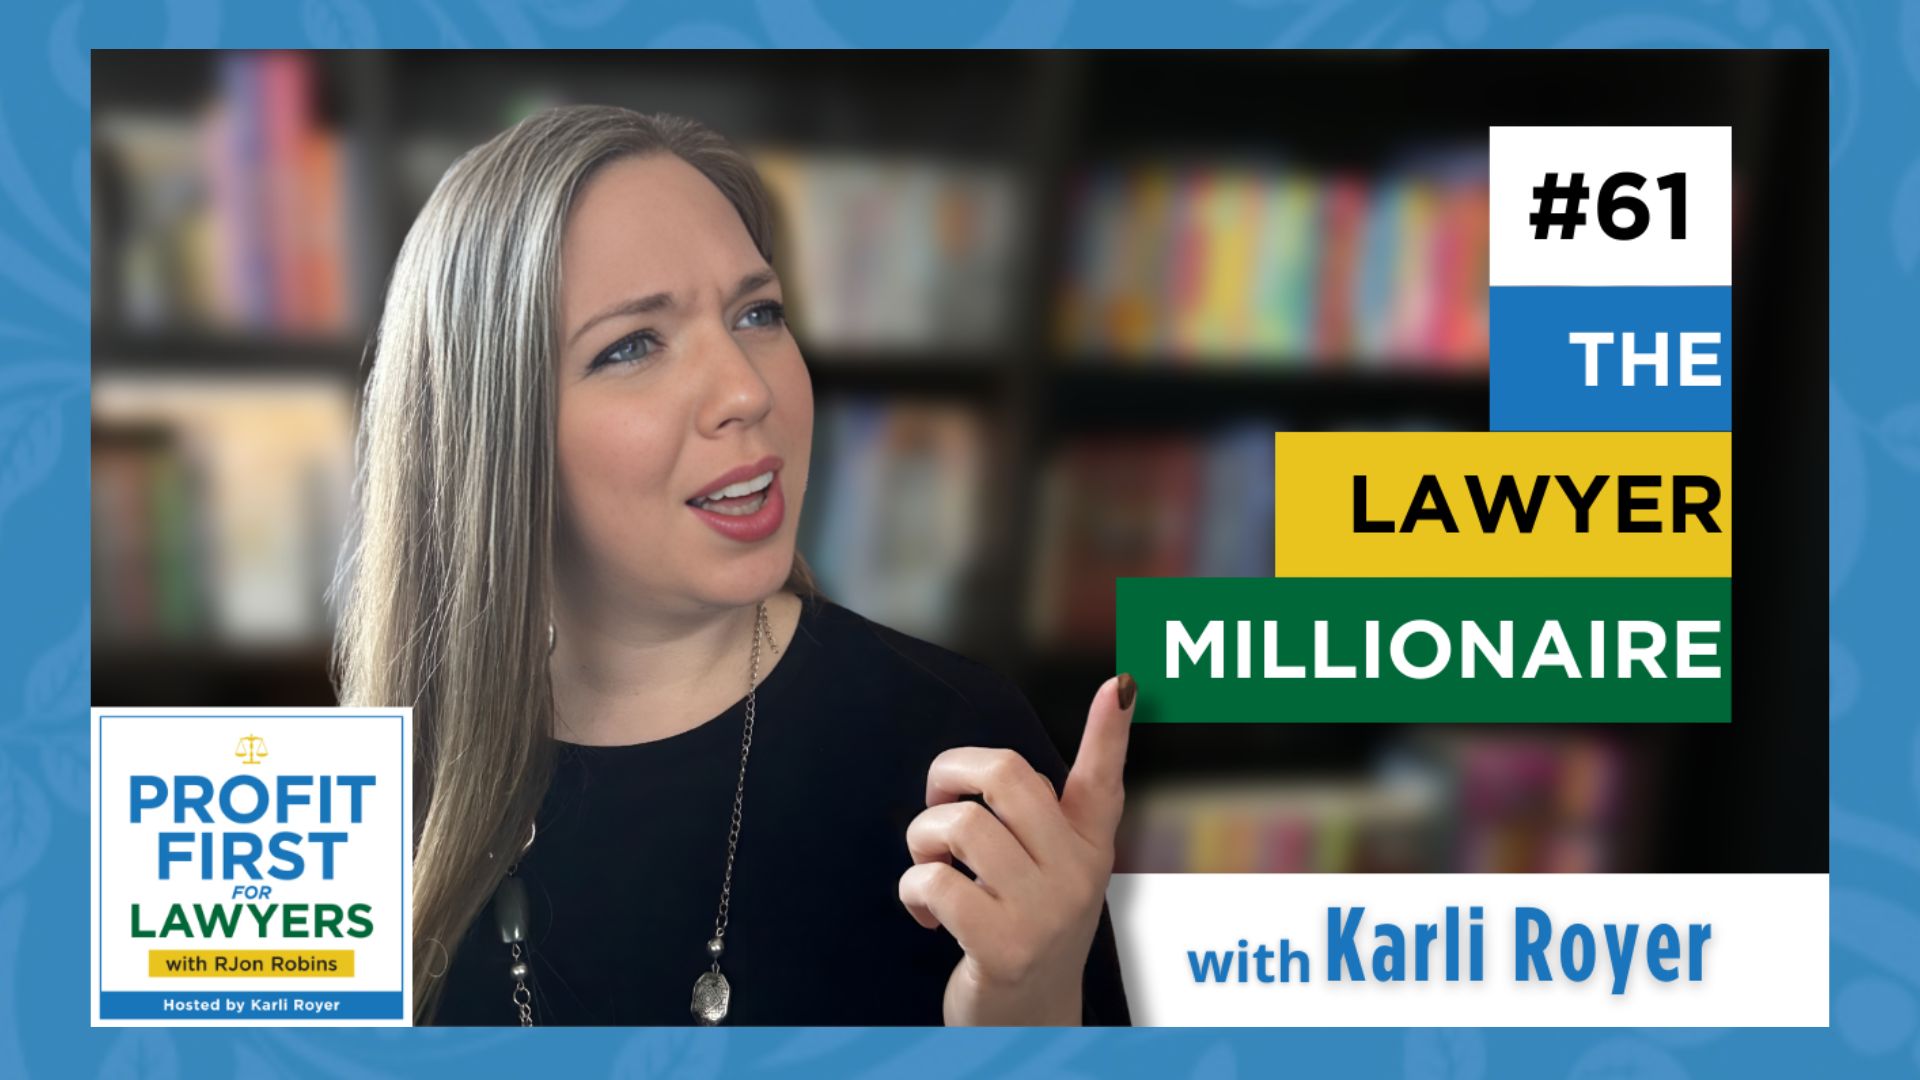 Featured image of Karli Royer for Profit first for Lawyers podcast episode 61 The Lawyer Millionaire. Karli is wearing a black top with silver necklace and earrings. She if looking to the side with an intrigued and puzzled expression on her face. She is pointing at to the title of the episode.